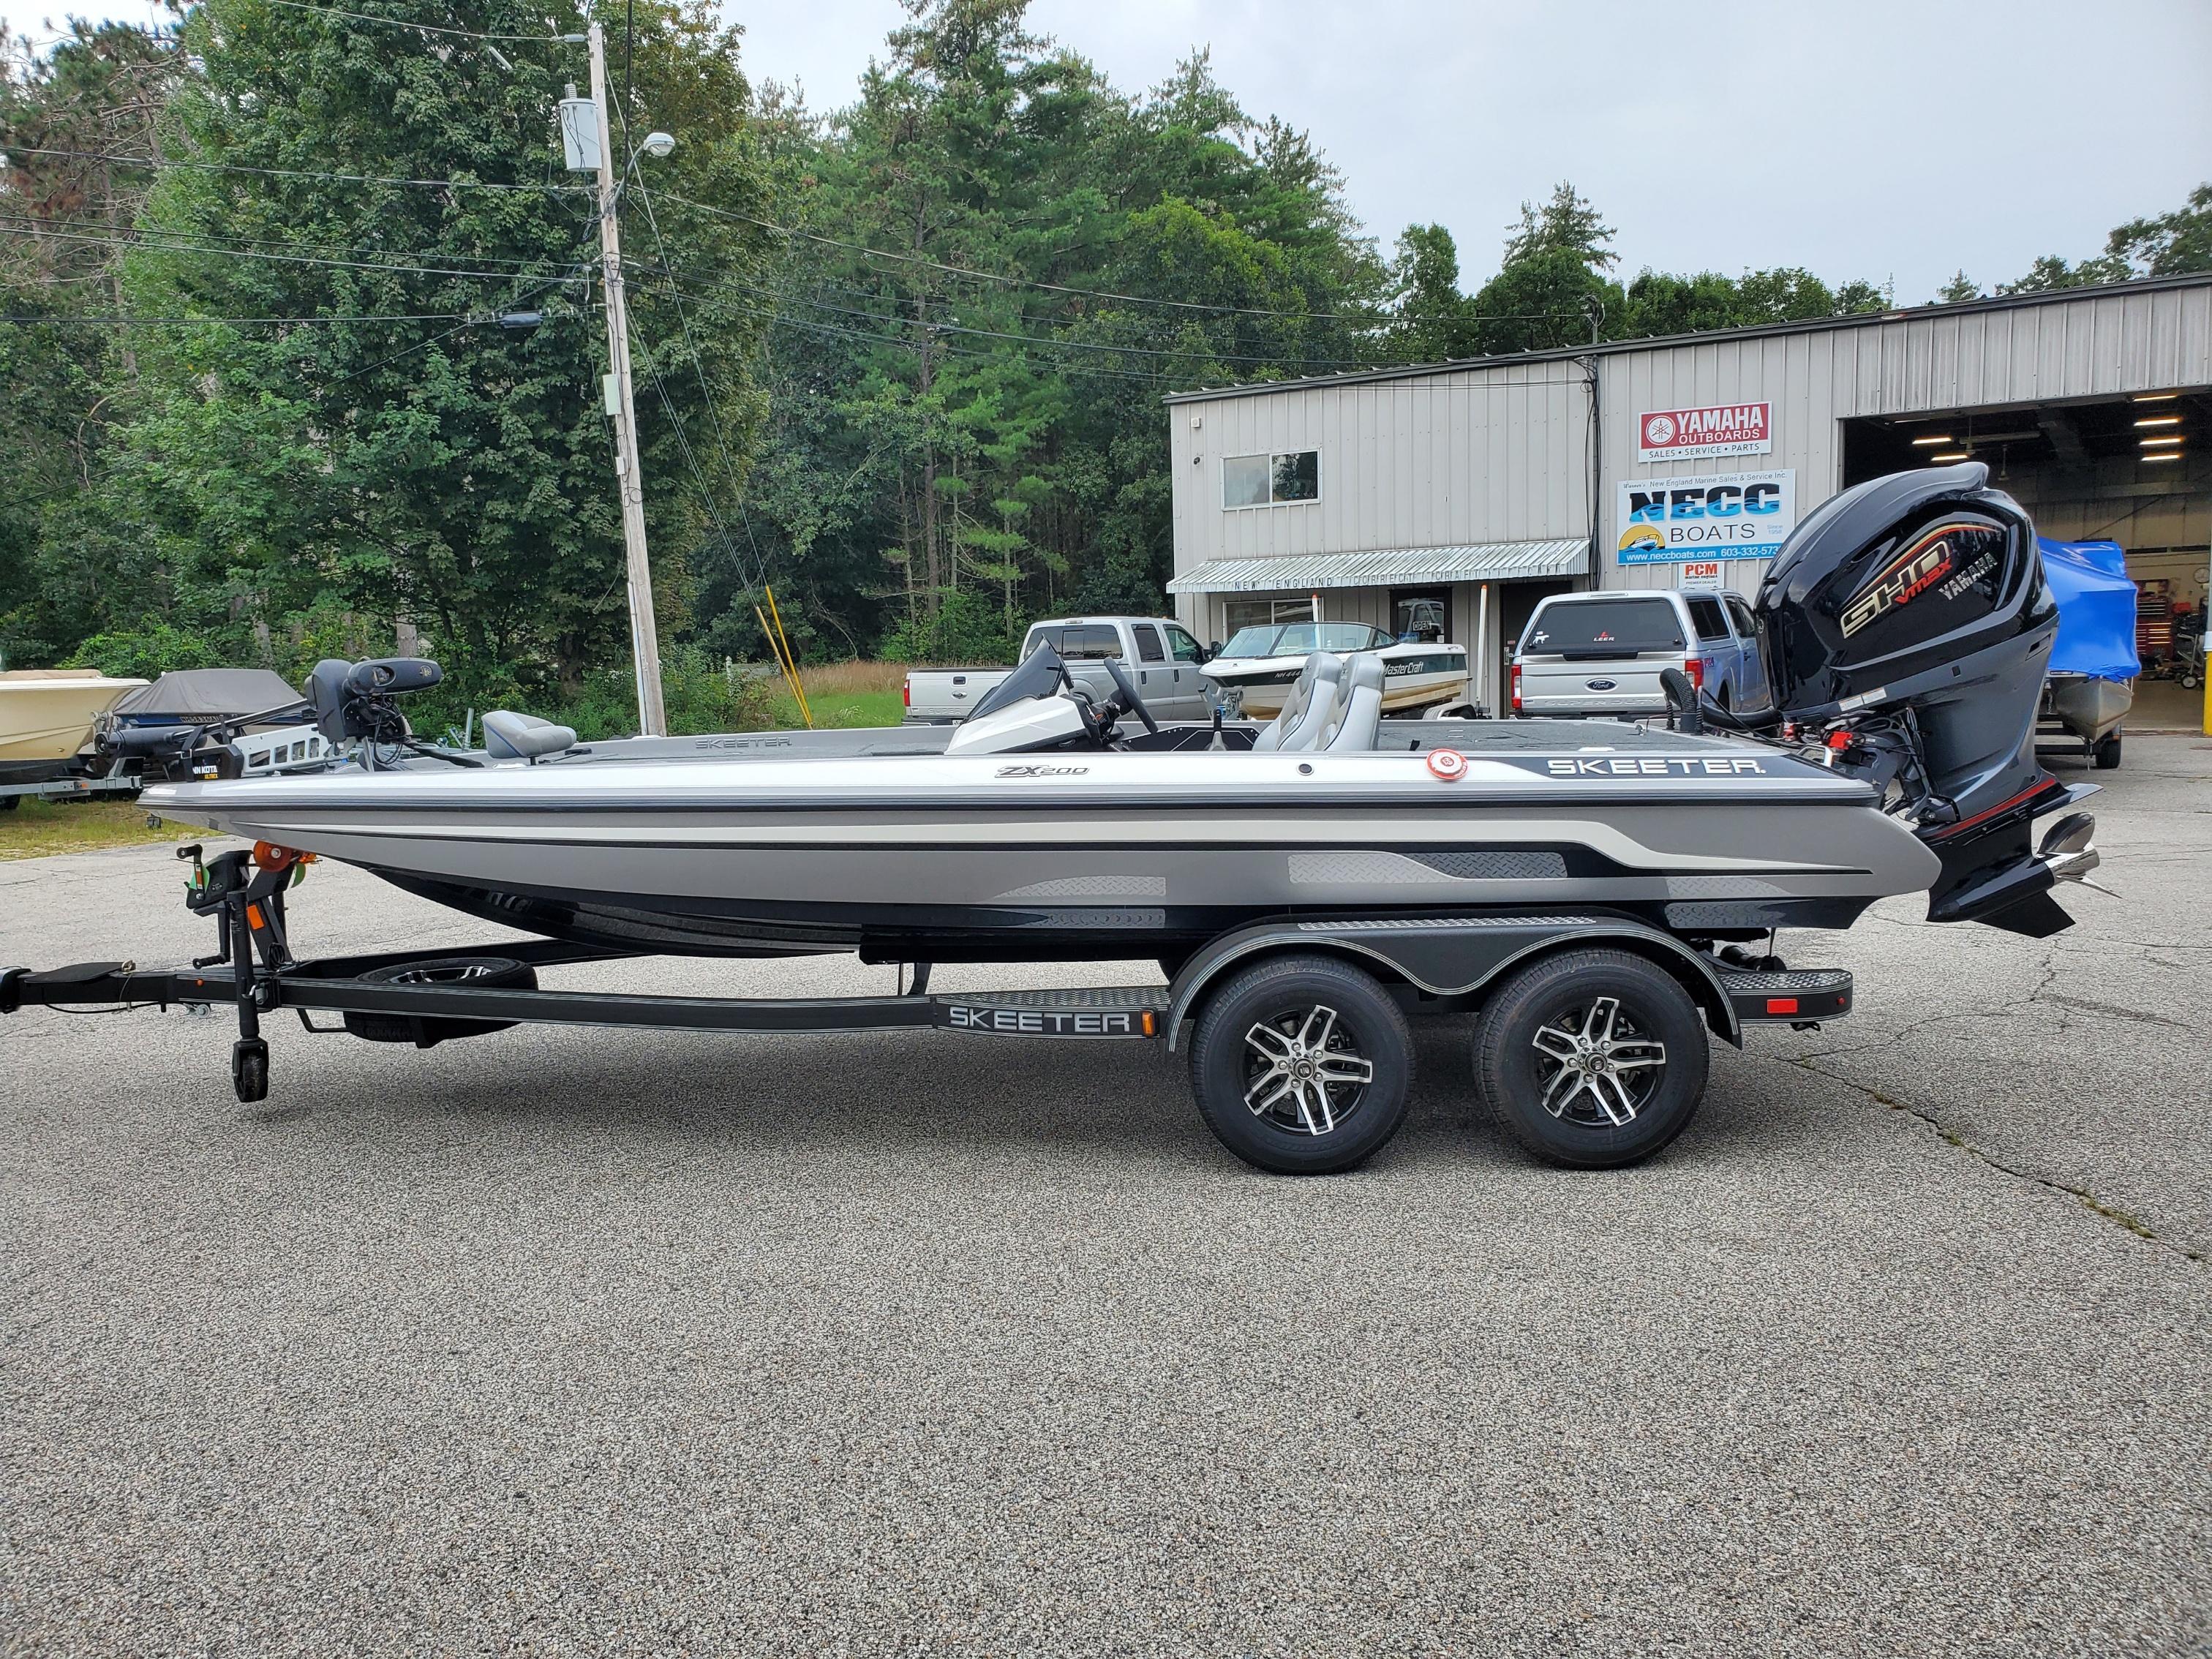 Explore Skeeter 200 Zx Boats For Sale - Boat Trader